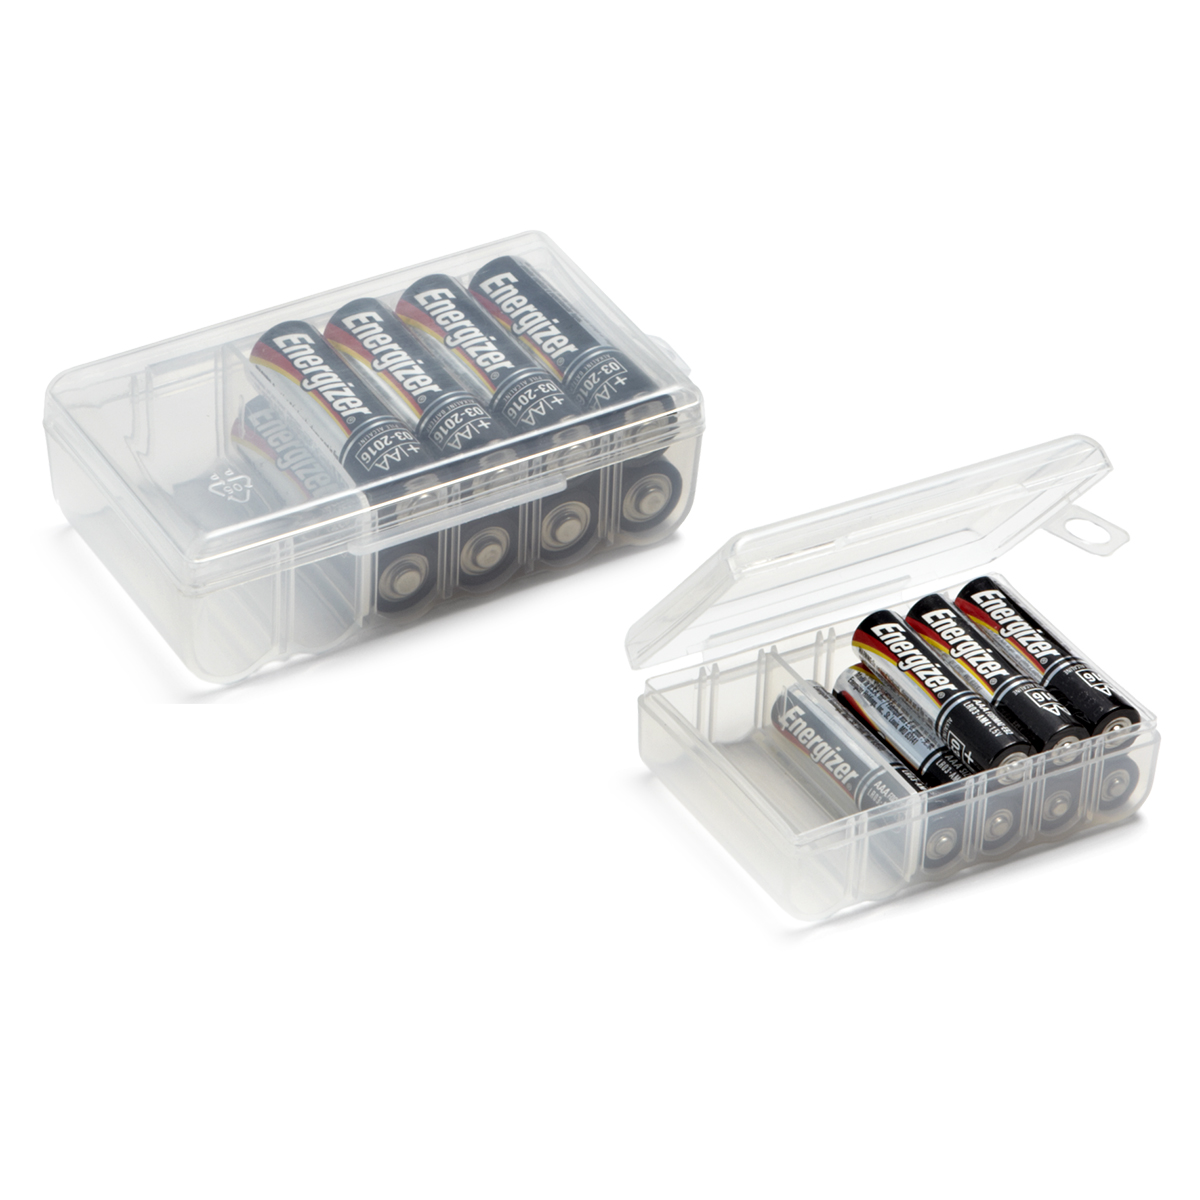 tsunami Controle Denken Battery Storage Containers | The Container Store